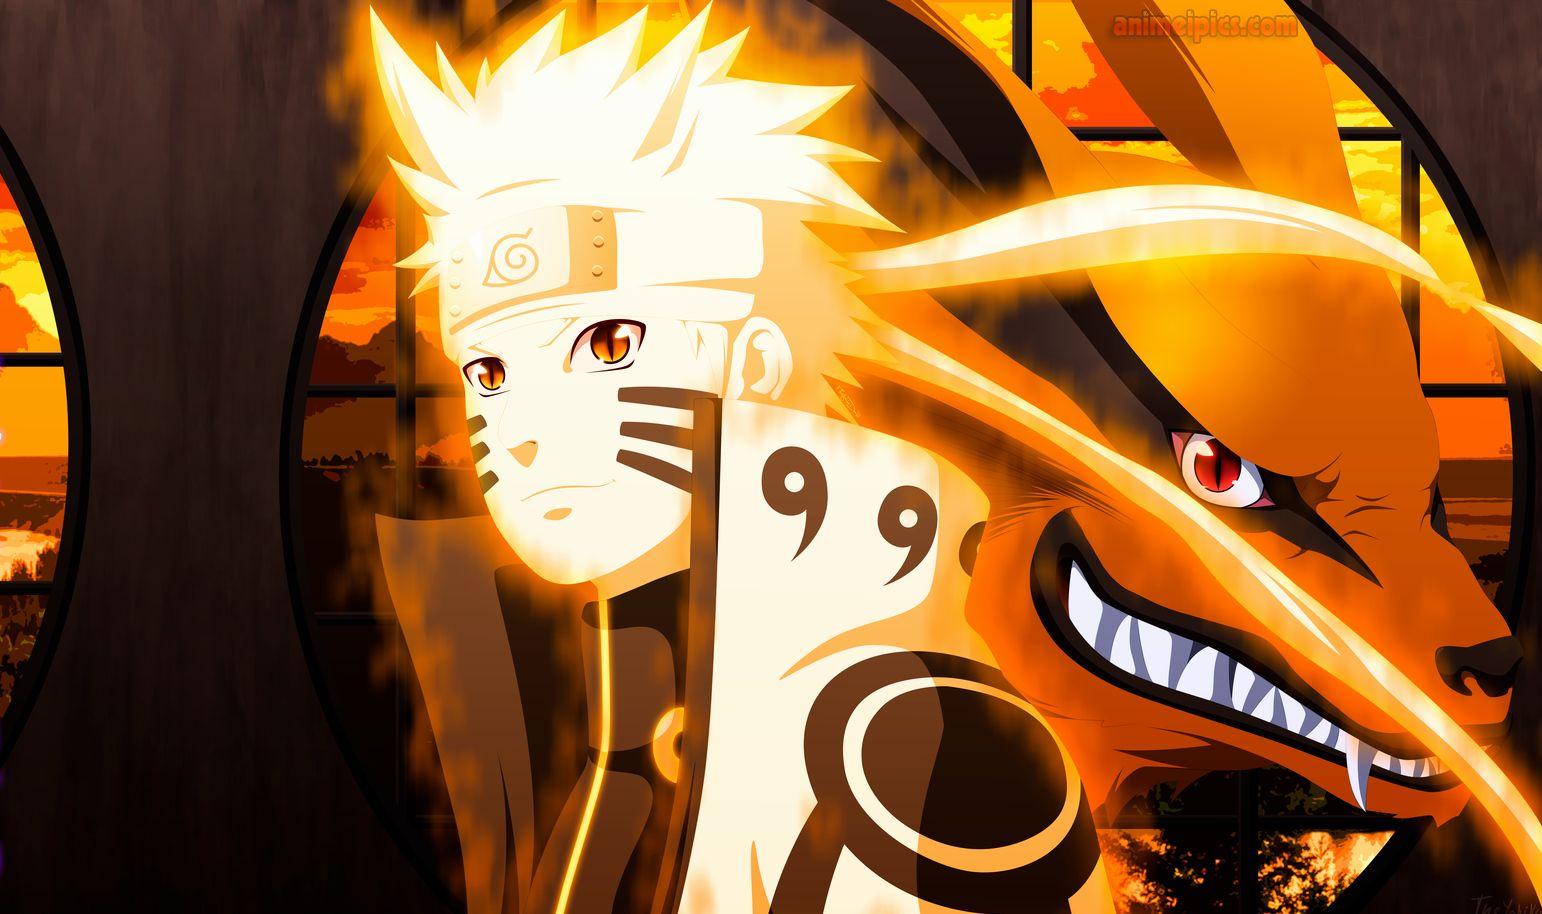 Naruto Nine Tails Awesome Was Naruto Controlled by the Nine Tailed